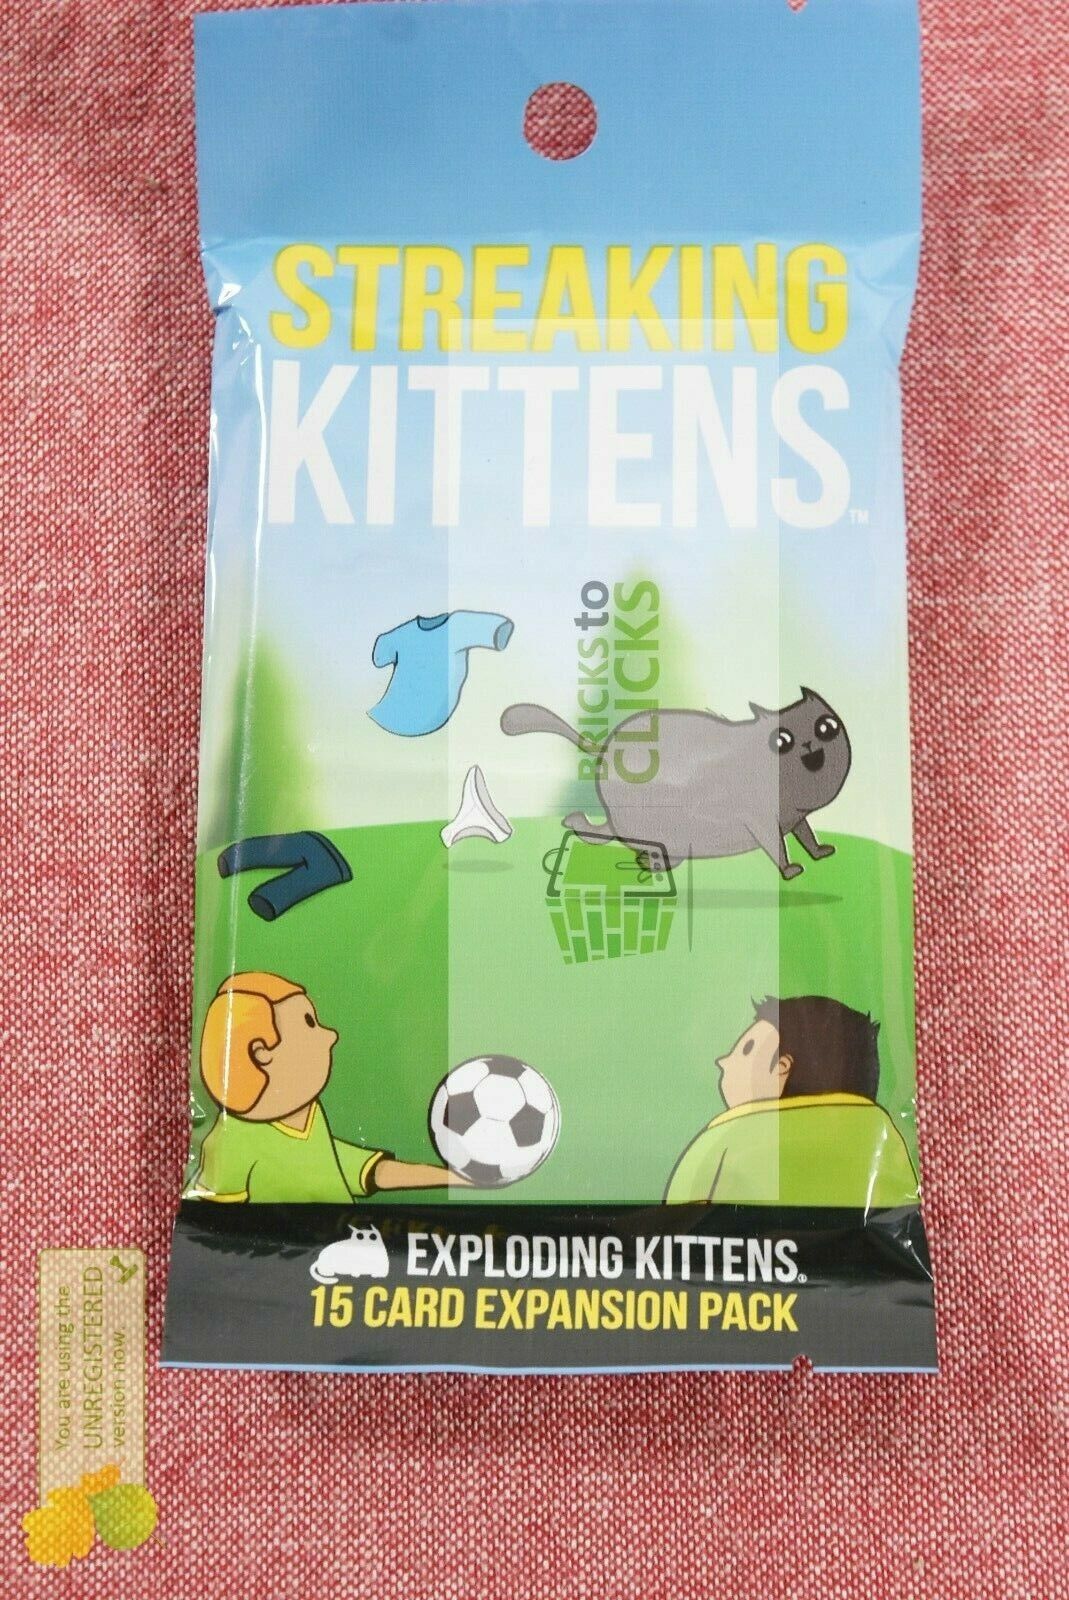 Streaking Kittens Game - Second Expansion of Exploding Kittens, 15 Card Pack